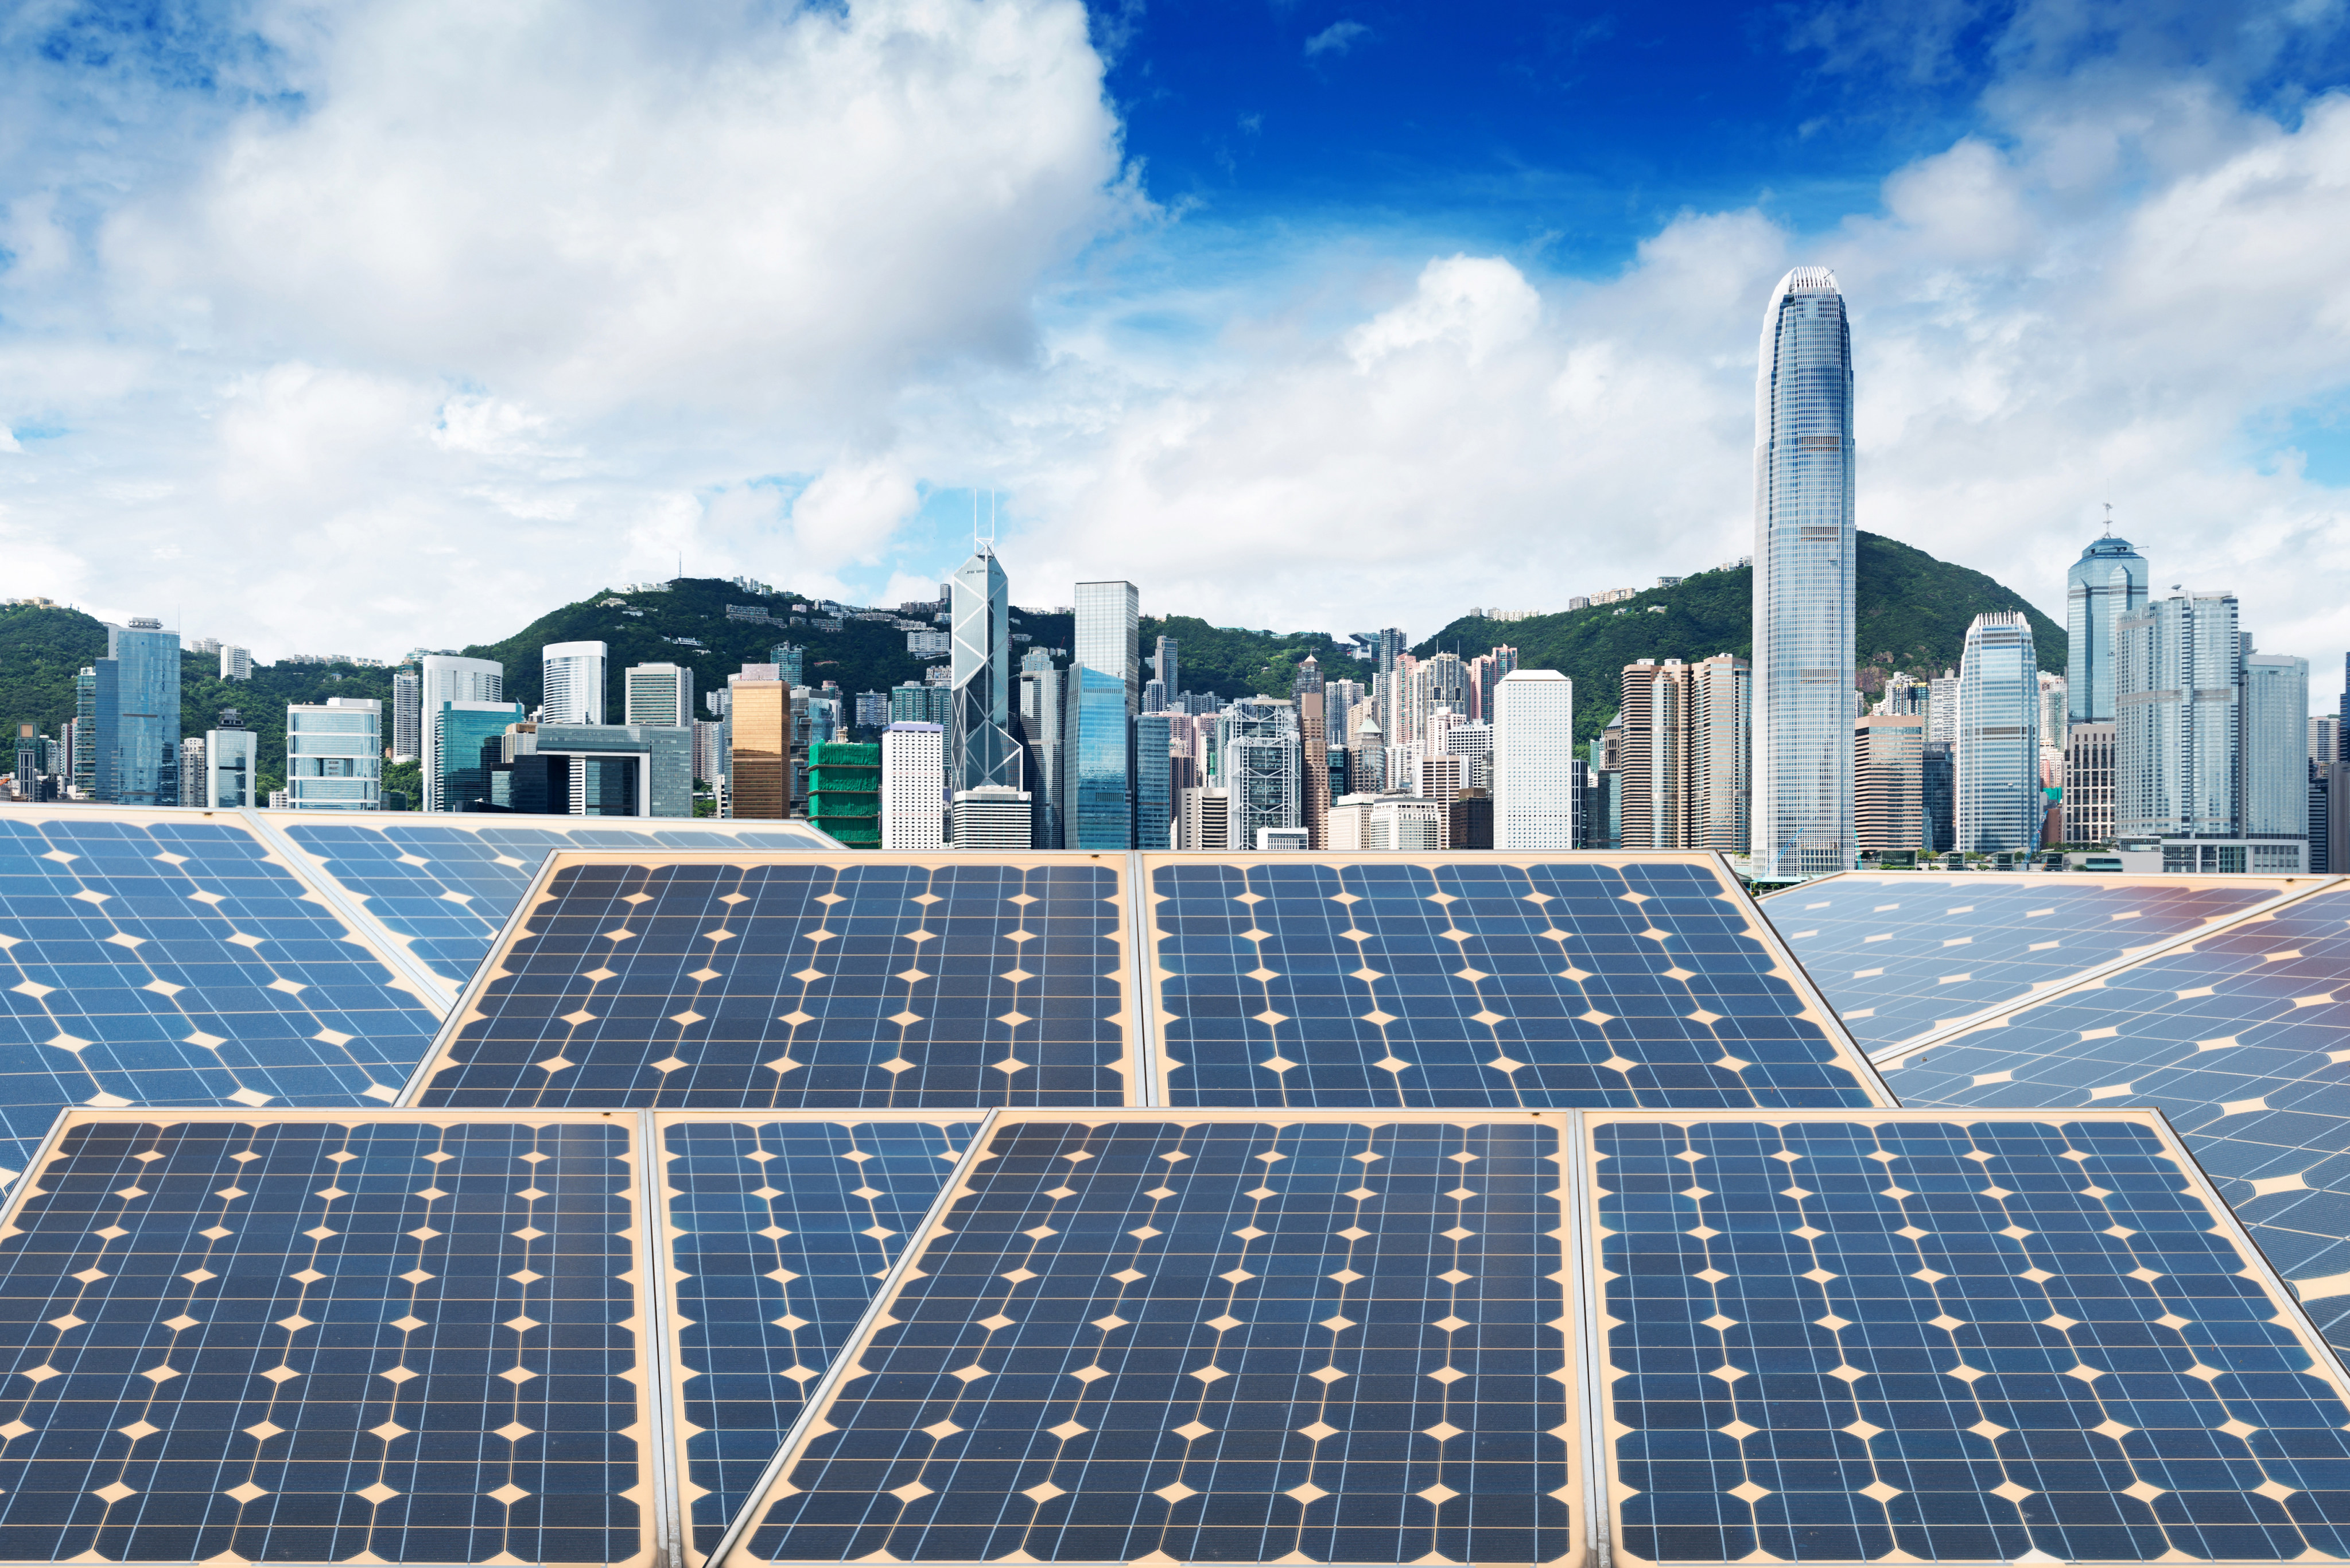 Hong Kong has the financial ecosystem, talent pool and regulations to attract and nurture companies that develop sustainable technology, according to speakers at the city’s inaugural philanthropy summit. Photo: Shutterstock